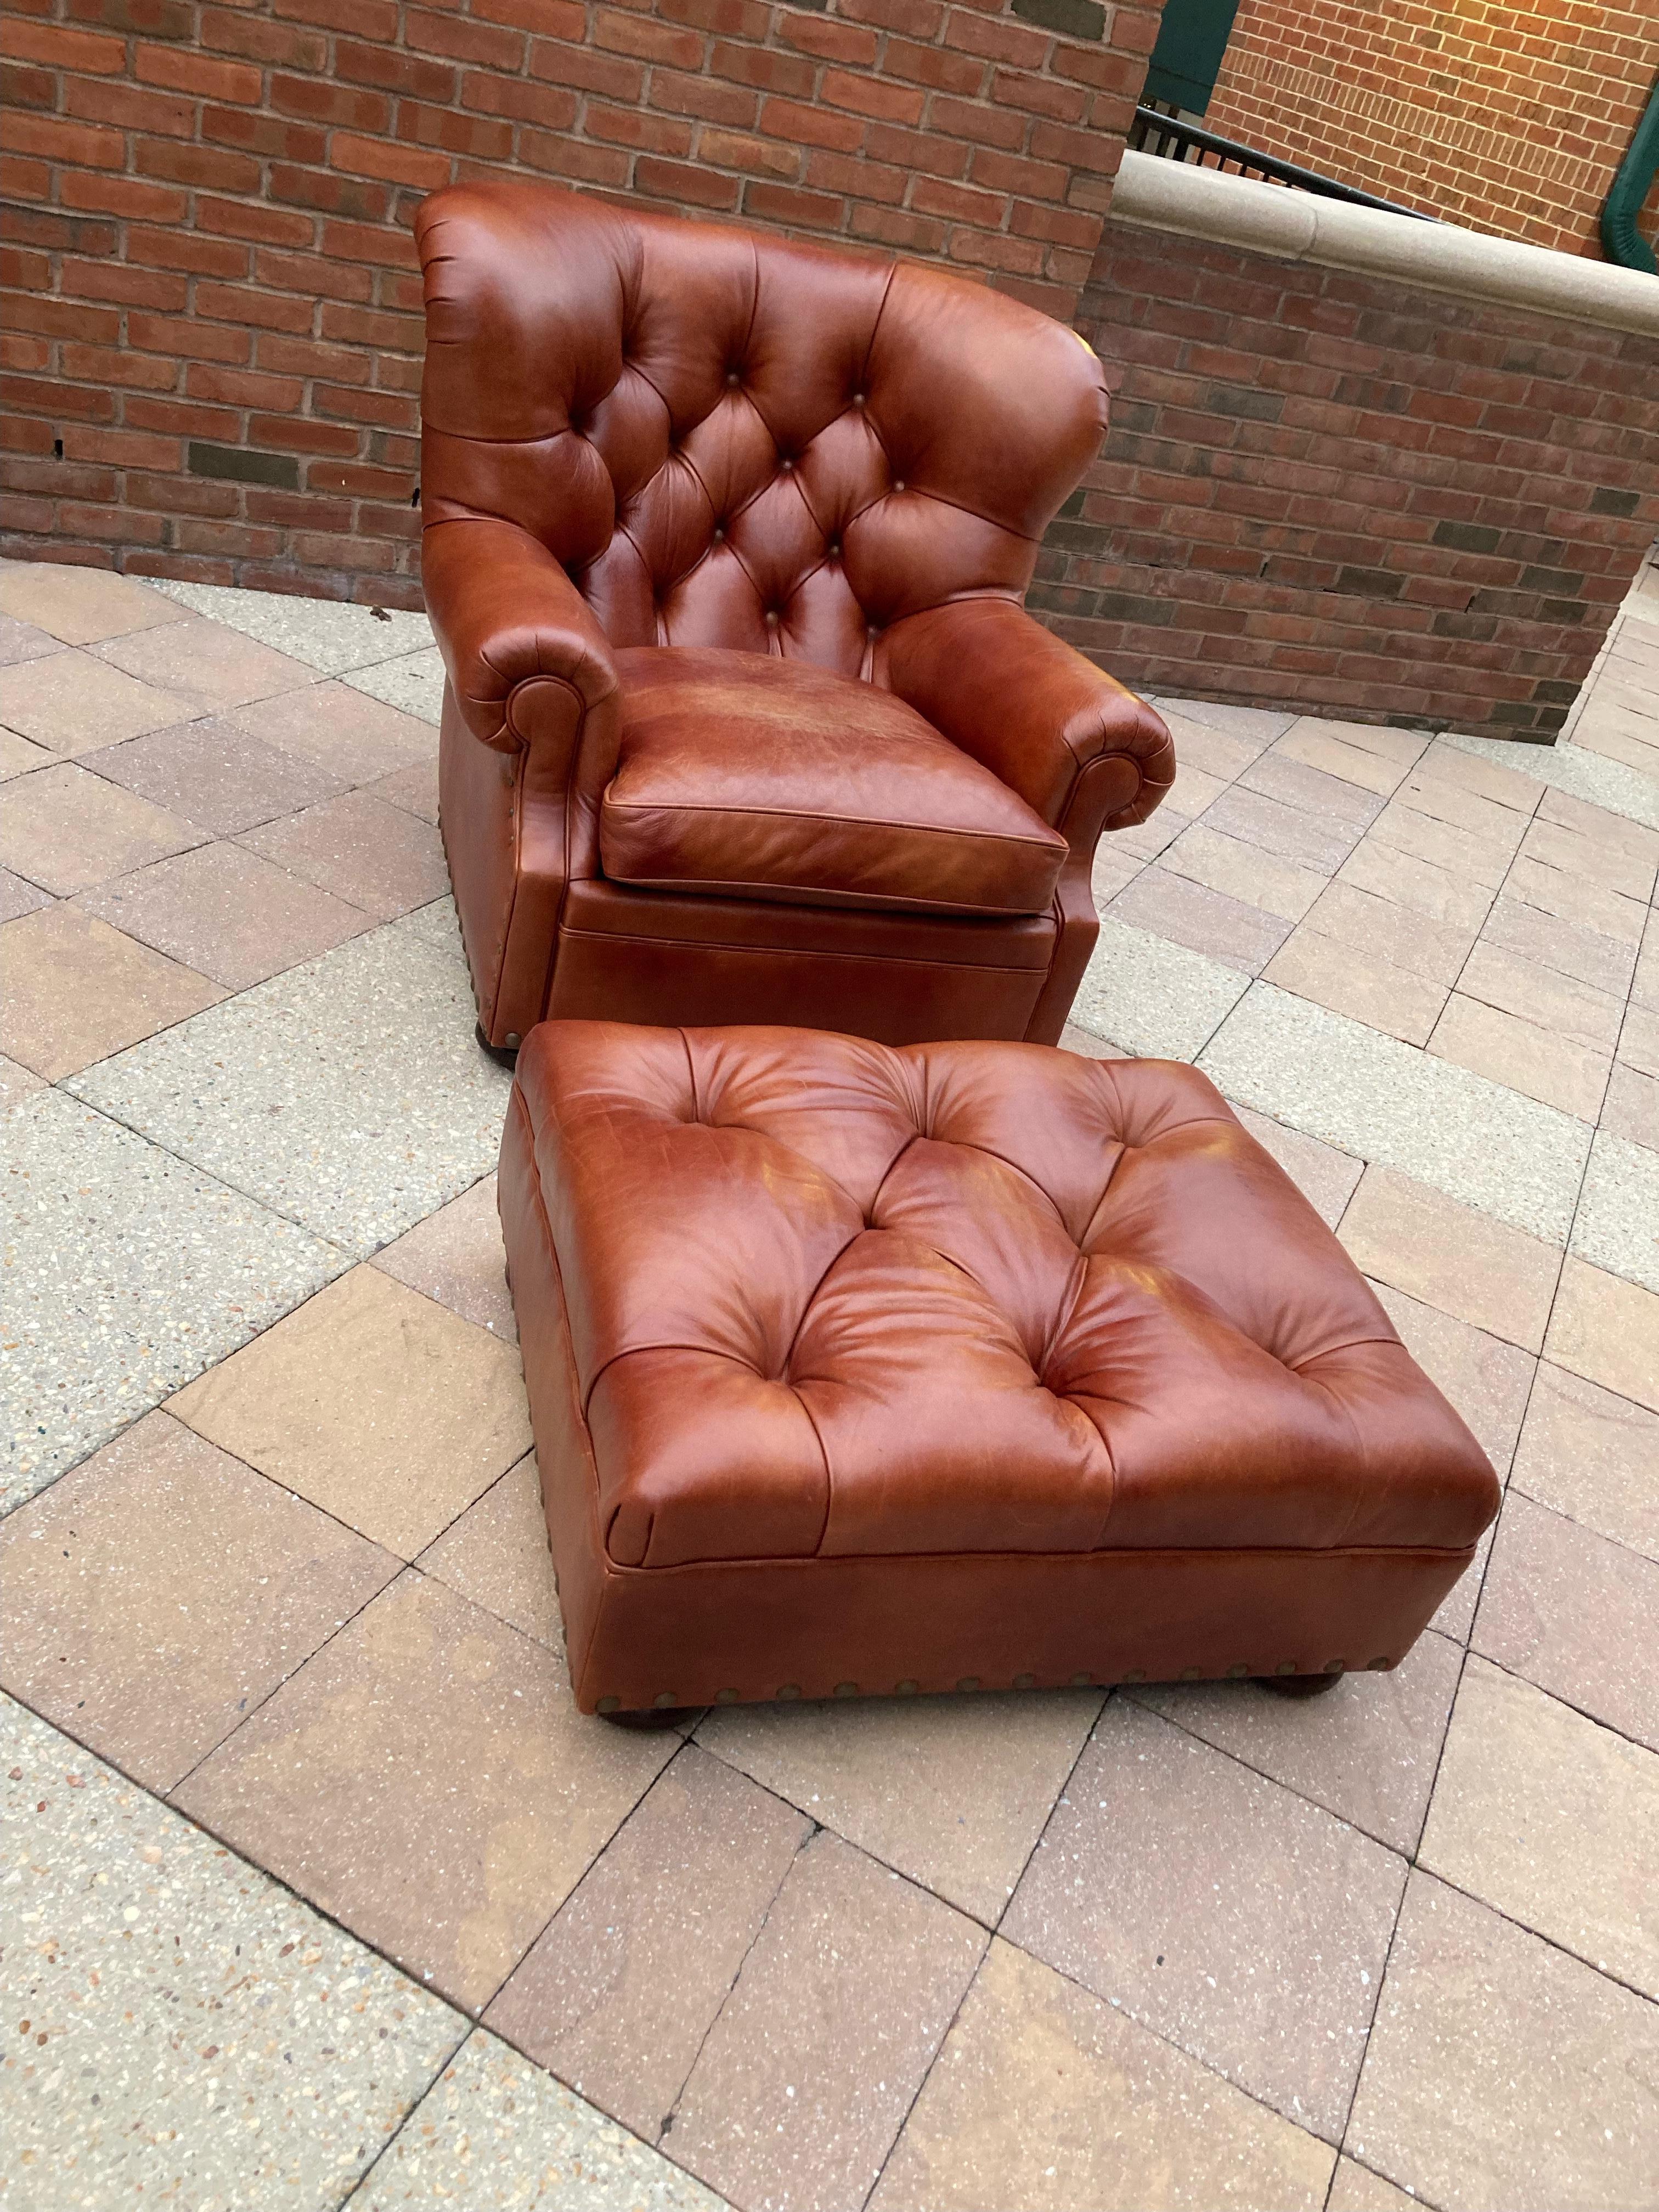 Classic and handsome tufted leather Writer's club chair and matching ottoman having mahogany bun feet and nailhead trim. Super comfy and inviting. Measures: Chair: 41 W x 41 D x 36 H Arm height 22 Arm width 8 Between arms 21 Sitting depth 25 Ottoman